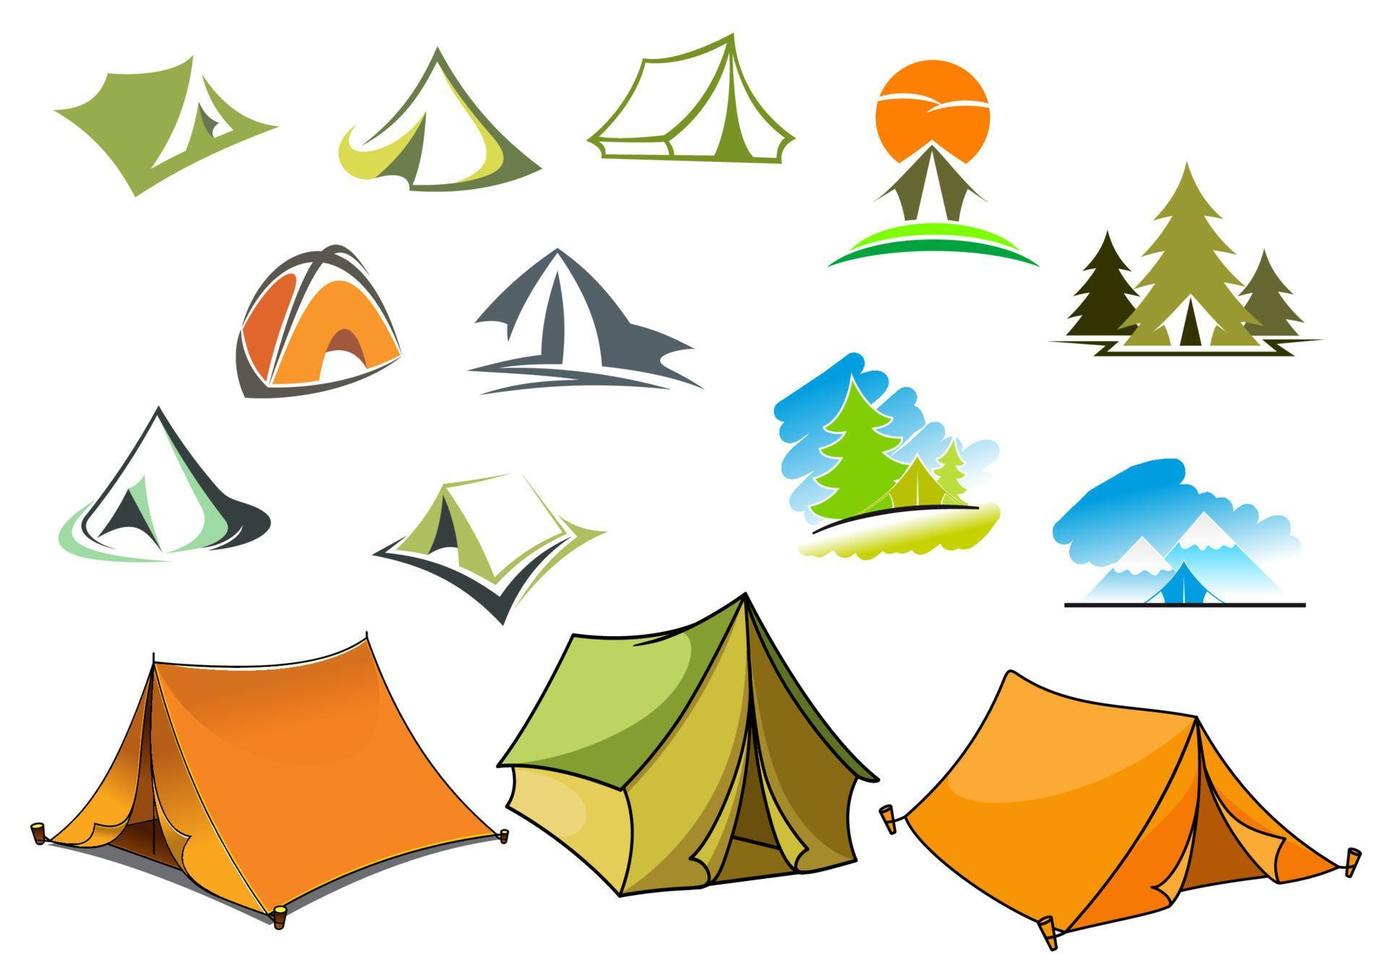 Camping symbols with tents and nature vector